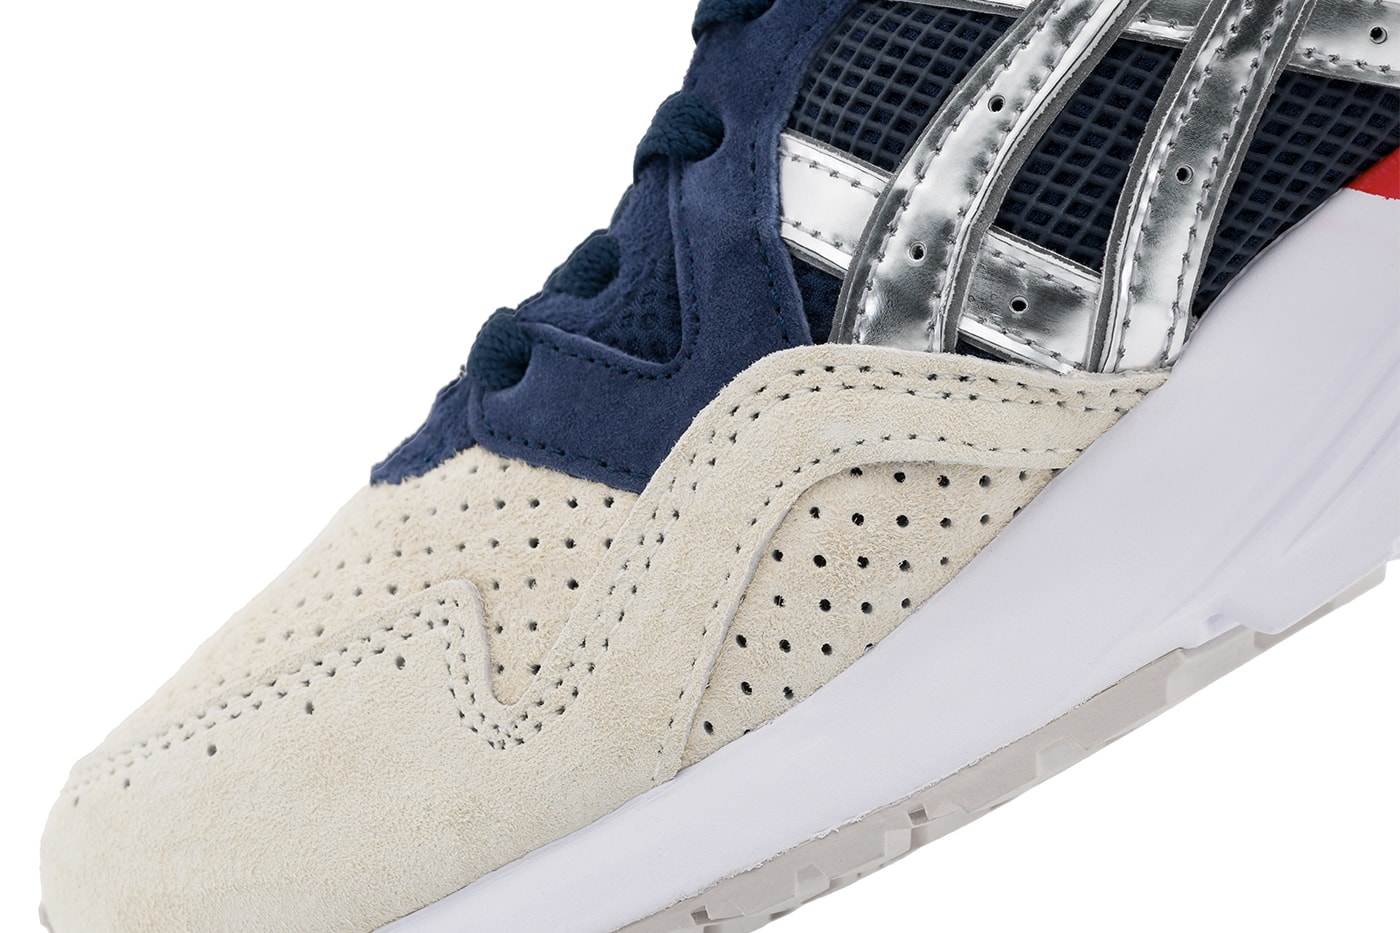 Concepts ASICS libertea gel lyte v sneaker launch 30th anniversary Deon Point release info date price